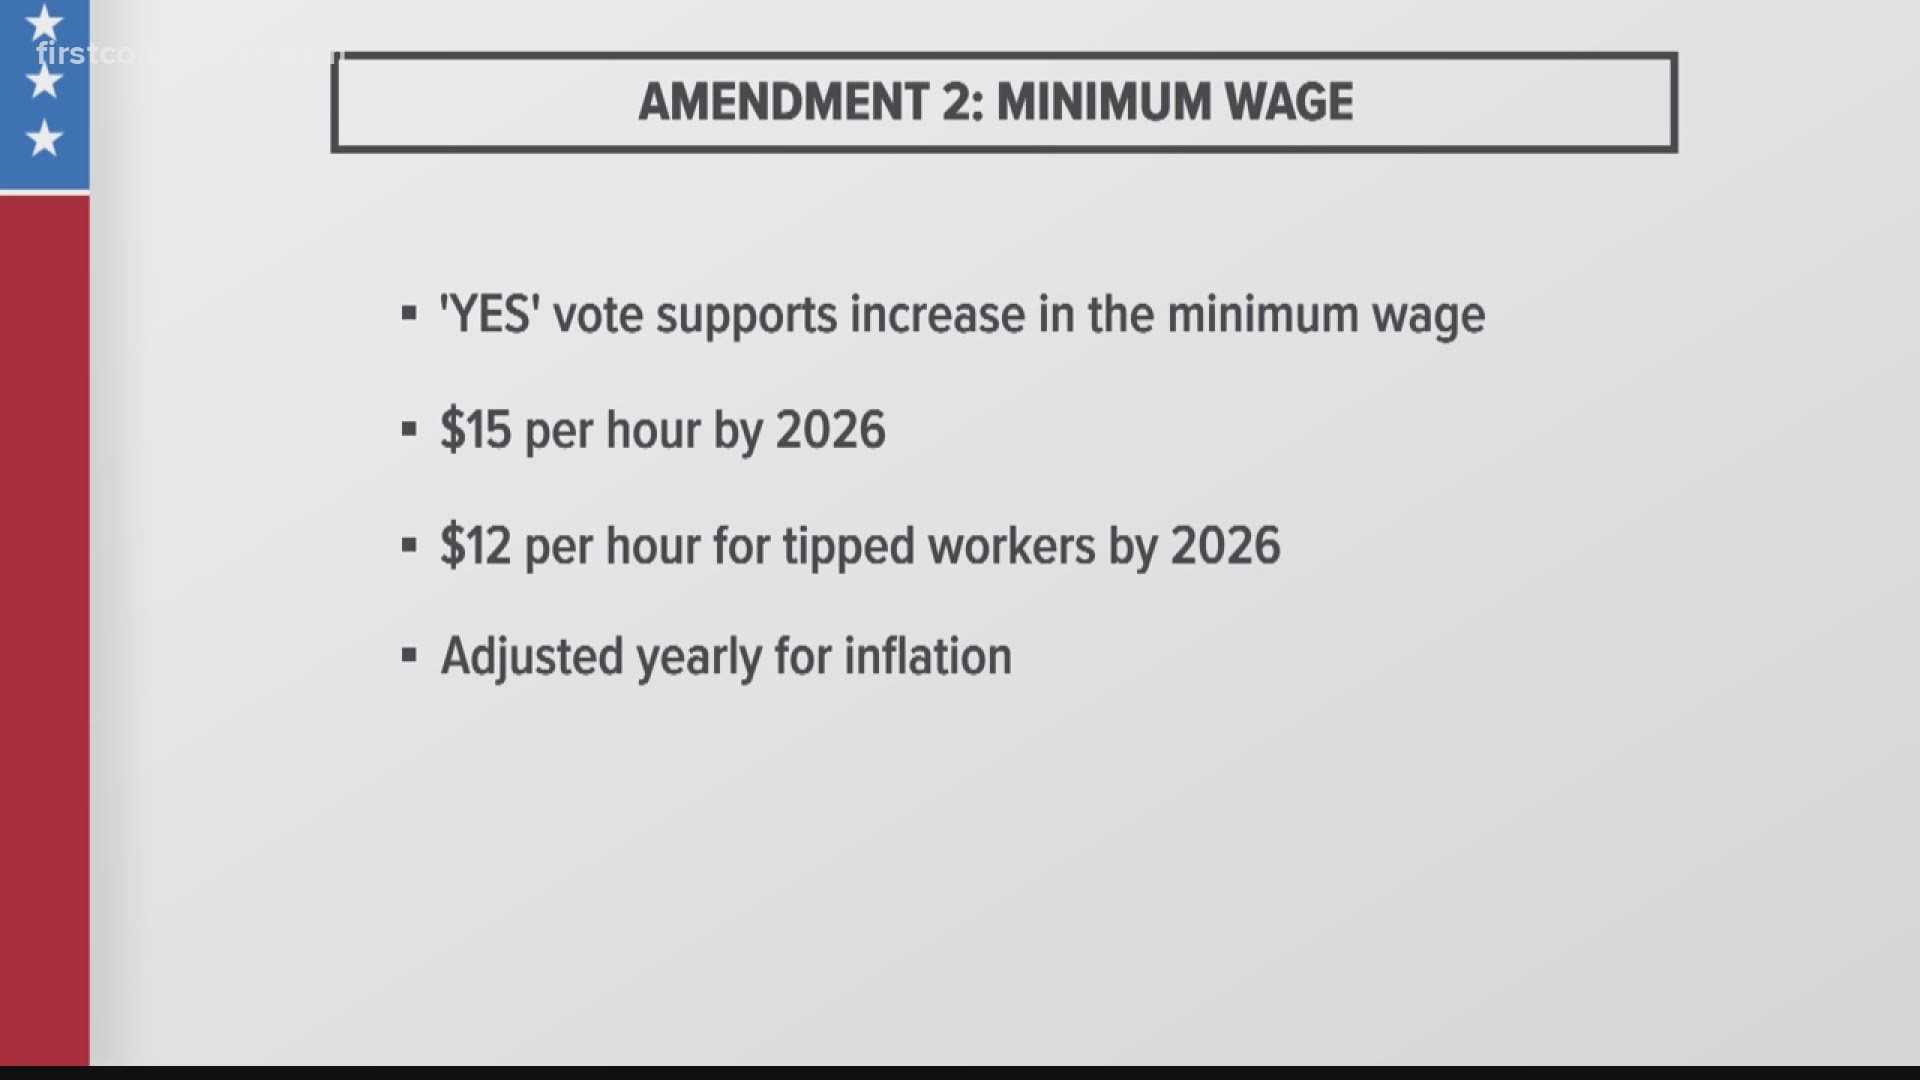 If passed, Amendment 2 would increase those wages by about a dollar each year until 2026 when it would reach $15 an hour, $12 an hour for tipped employees.